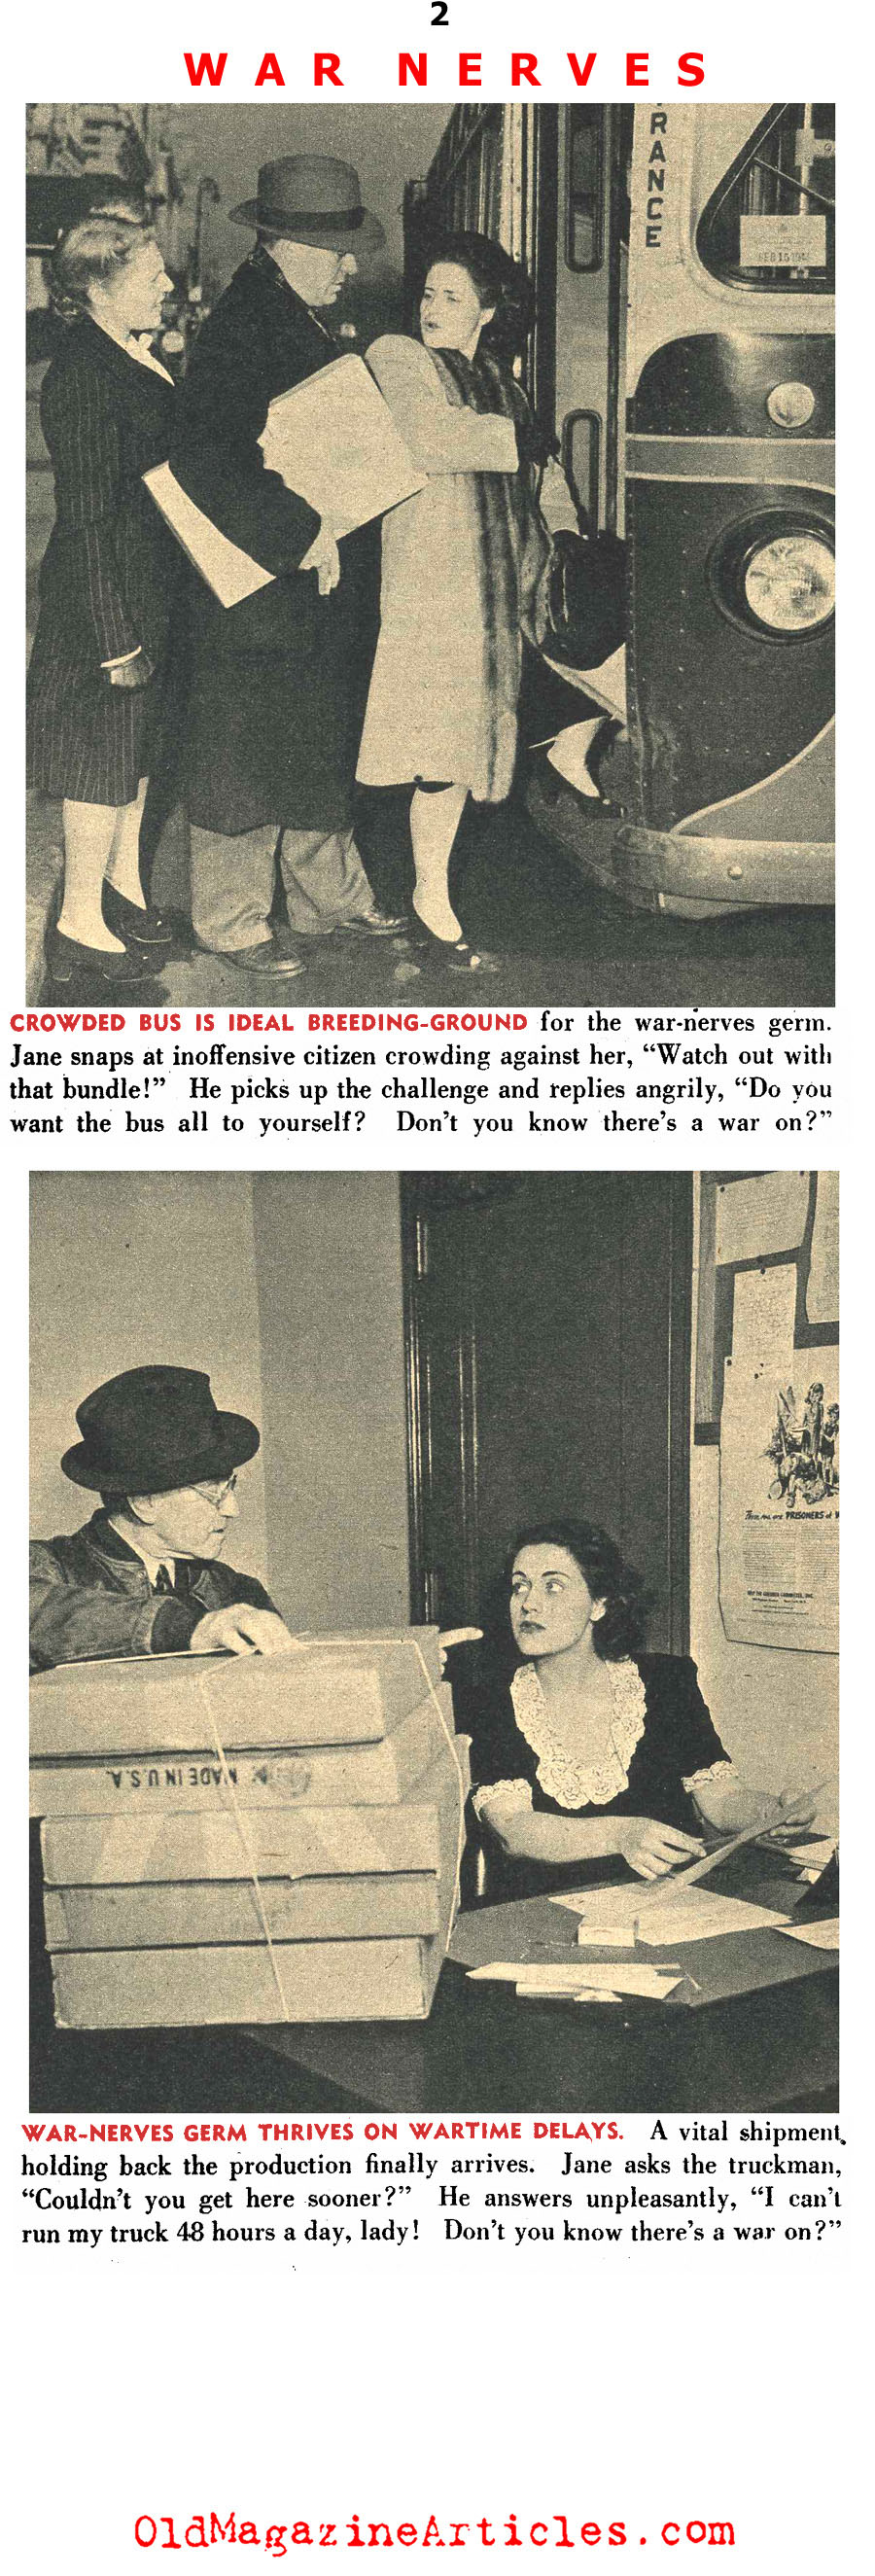 Dontchya Know There's A War On! (Click Magazine, 1944)